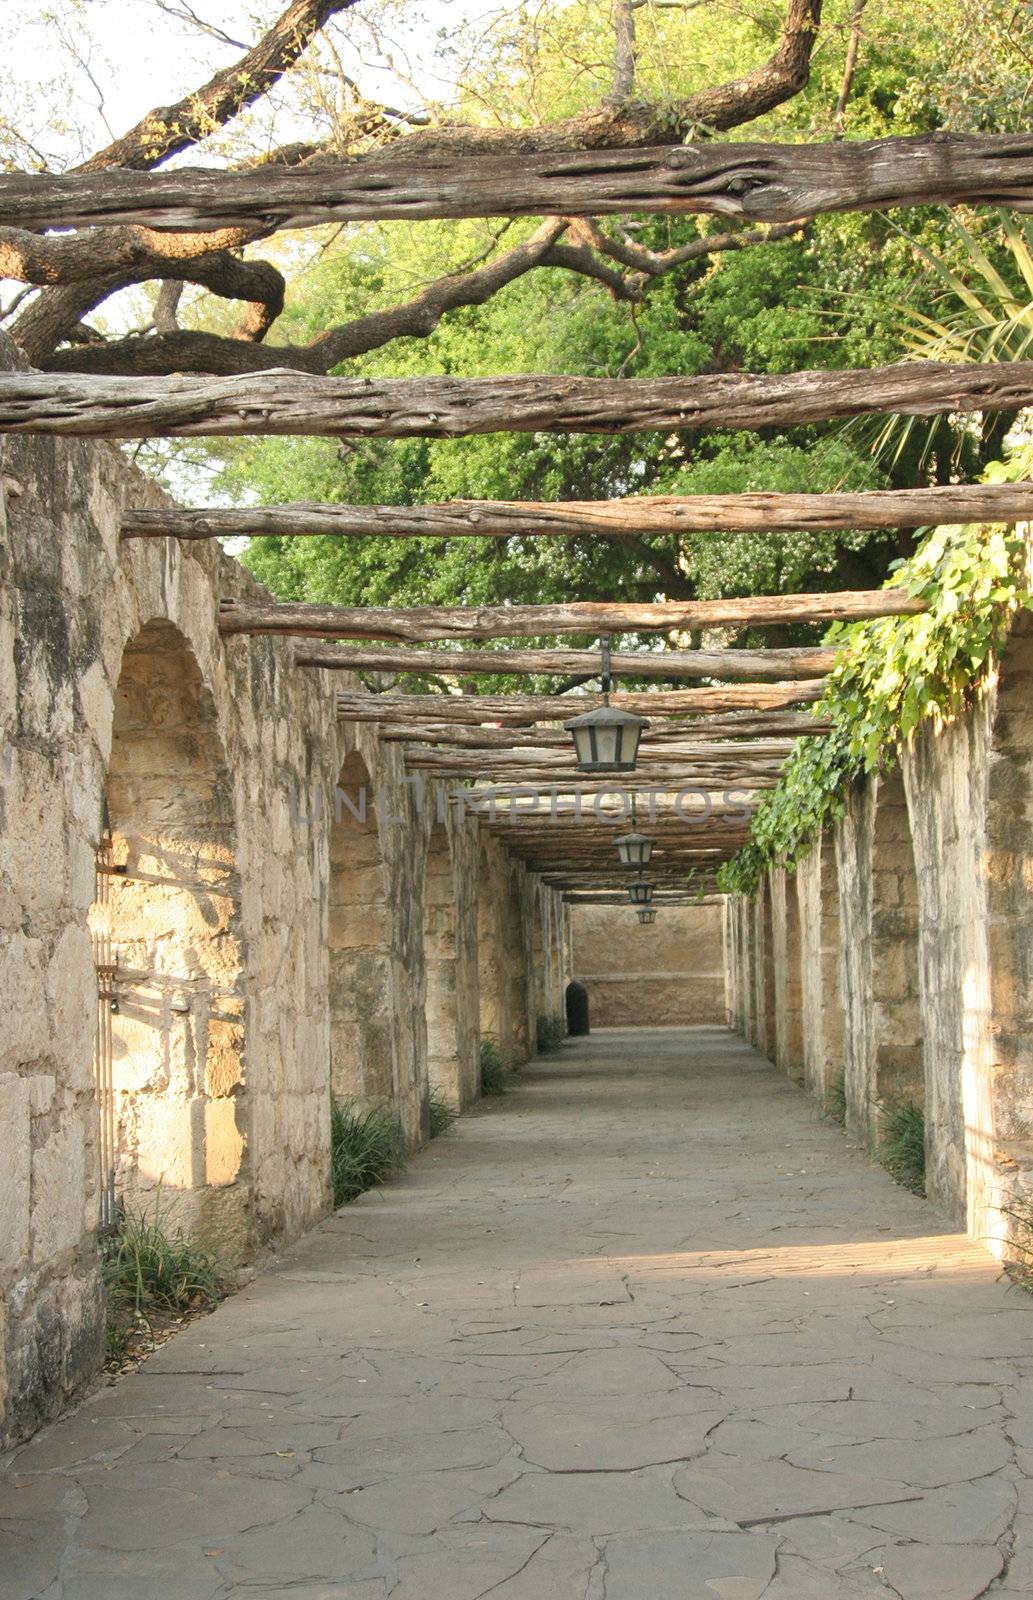 A timber lined colonnade at the Alamo in San Antonio Texas